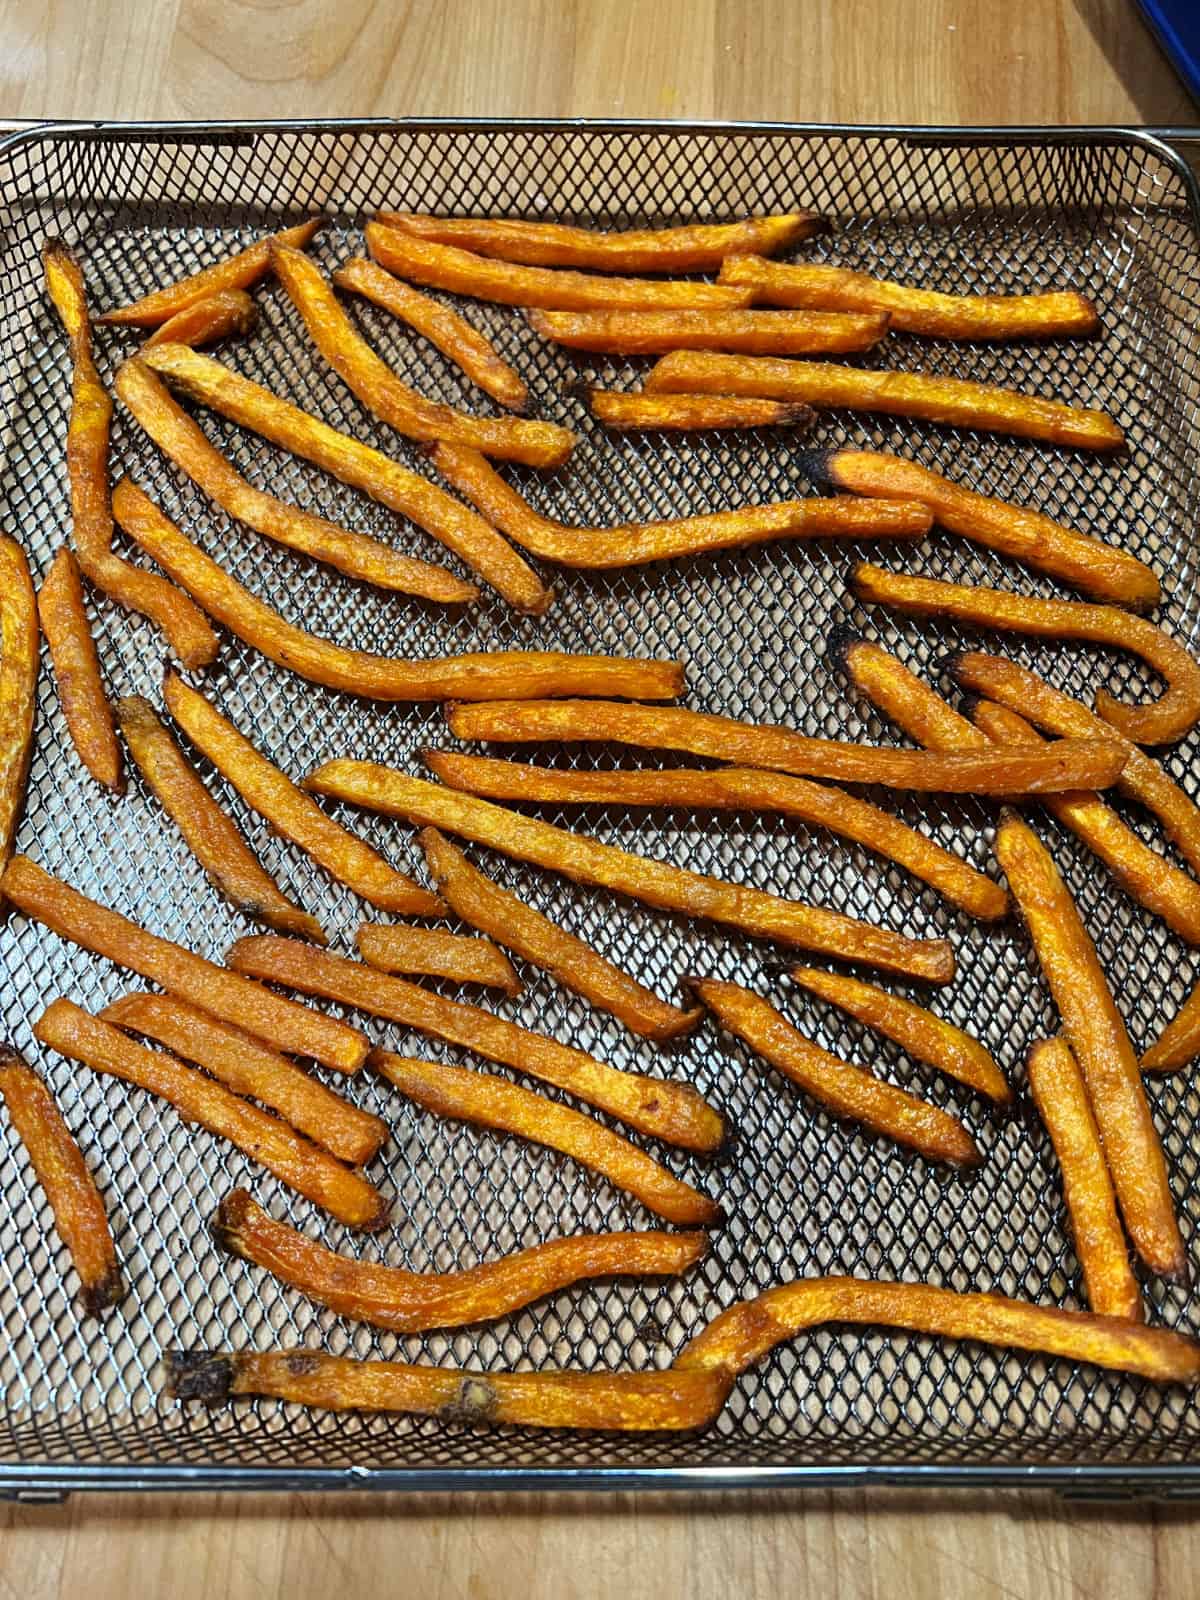 Fully cooked Alexia sweet potato fries from the air fryer.